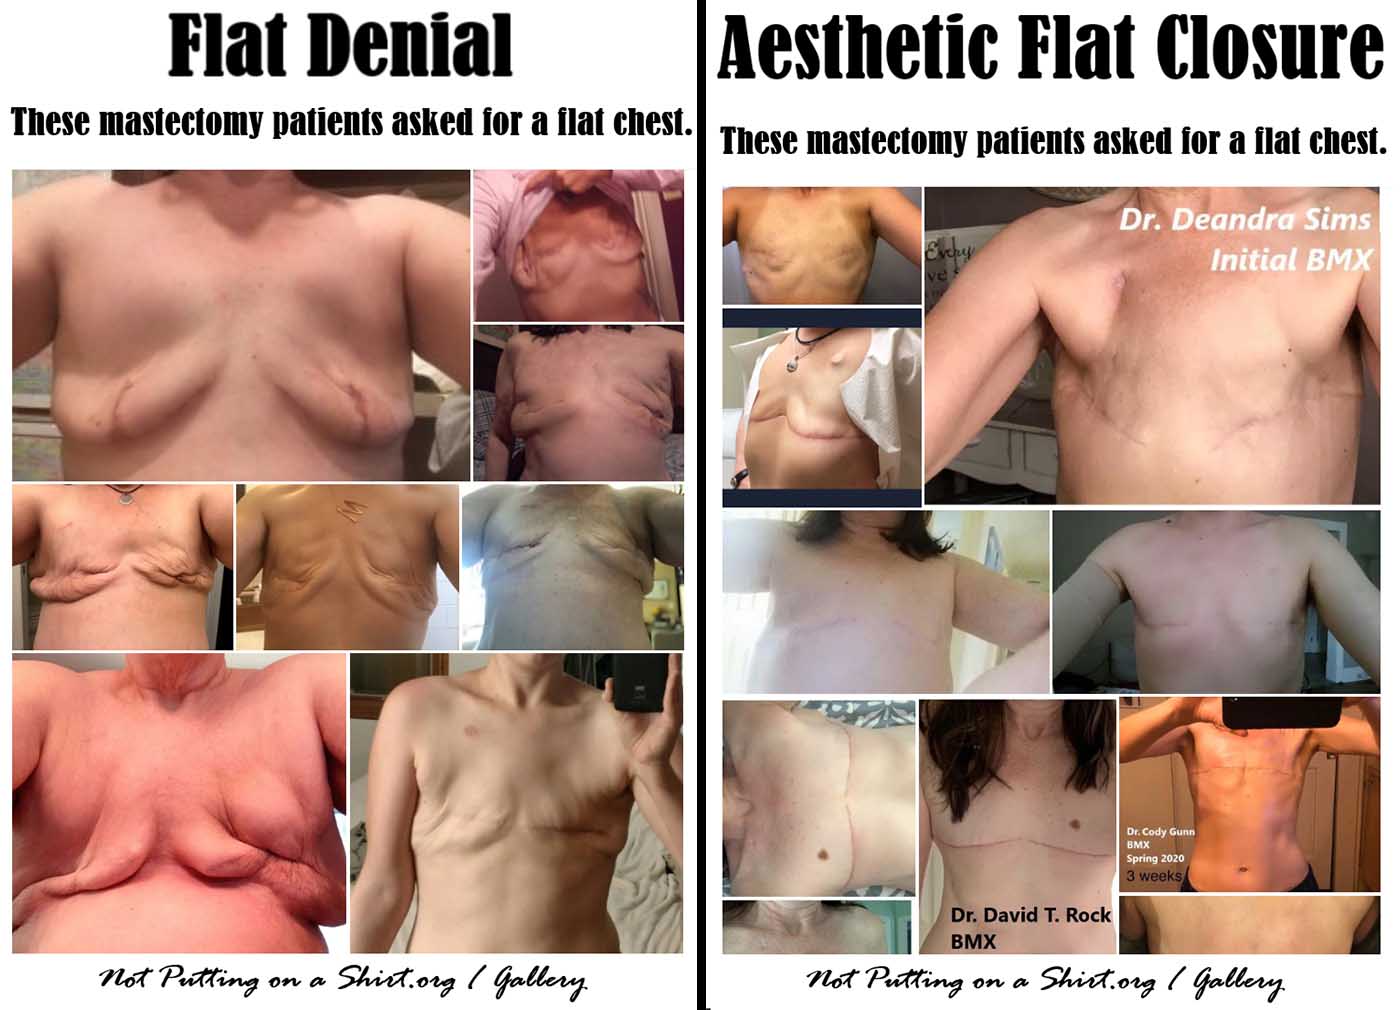 Going flat: Breast cancer survivors advocate for 'normal, beautiful' aesthetic  flat closure